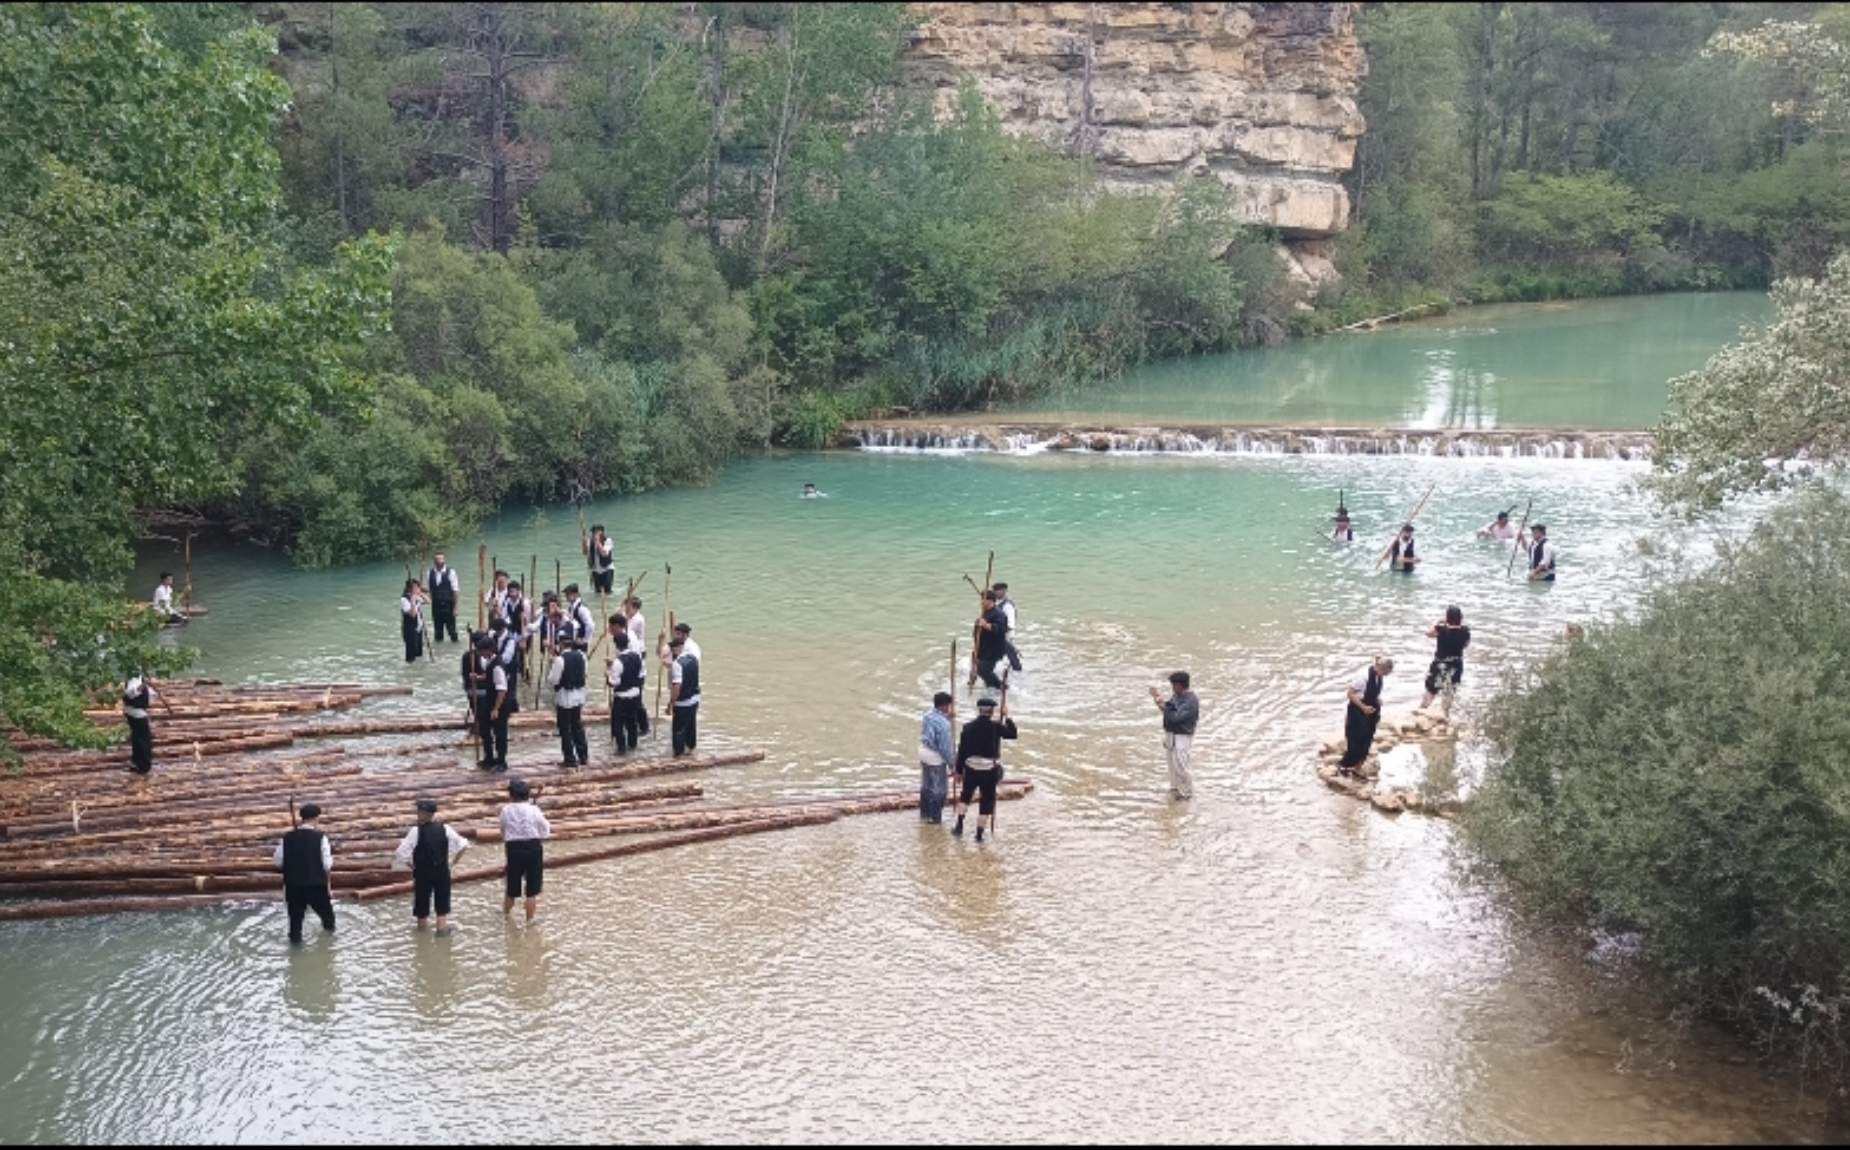 Several people in the river dressed in typical costumes